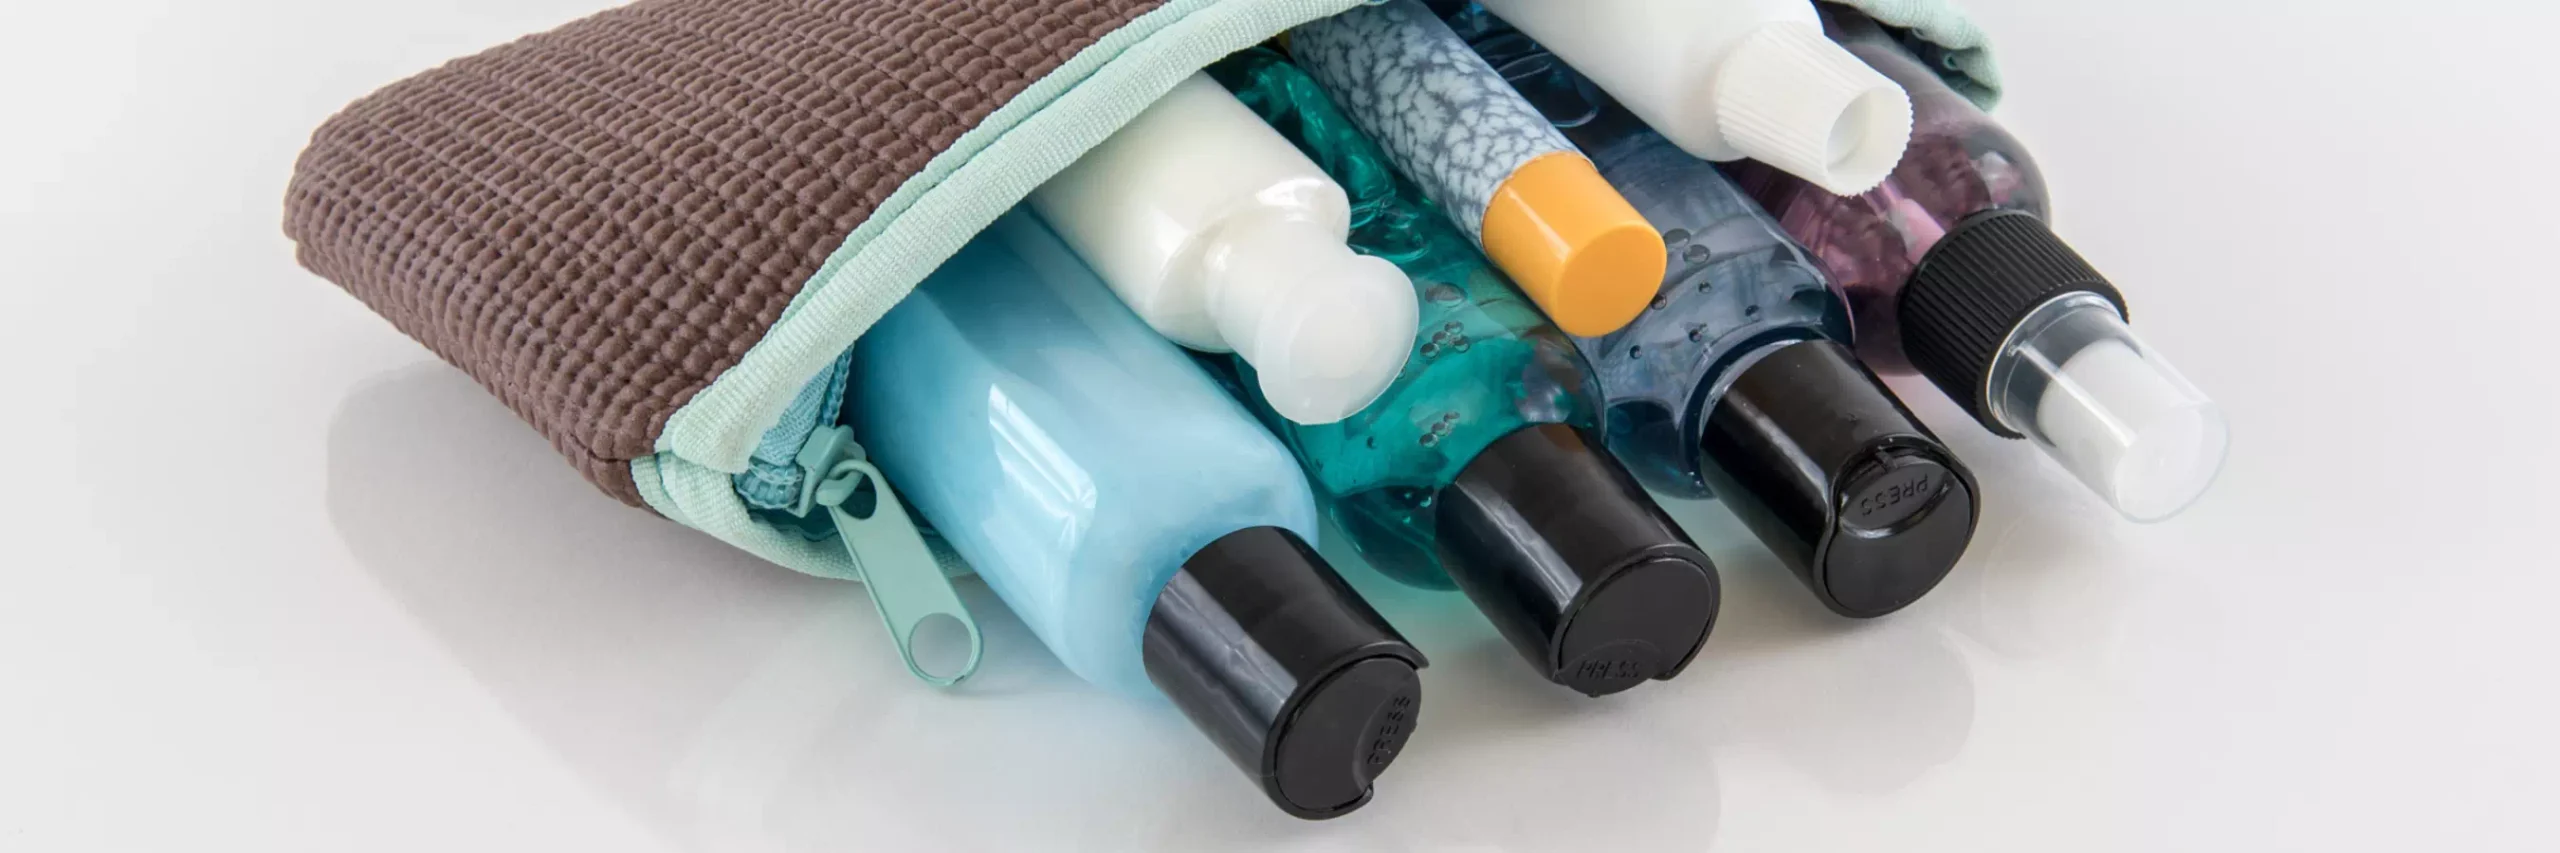 Travel Size Toiletries or Decanting, what is best?